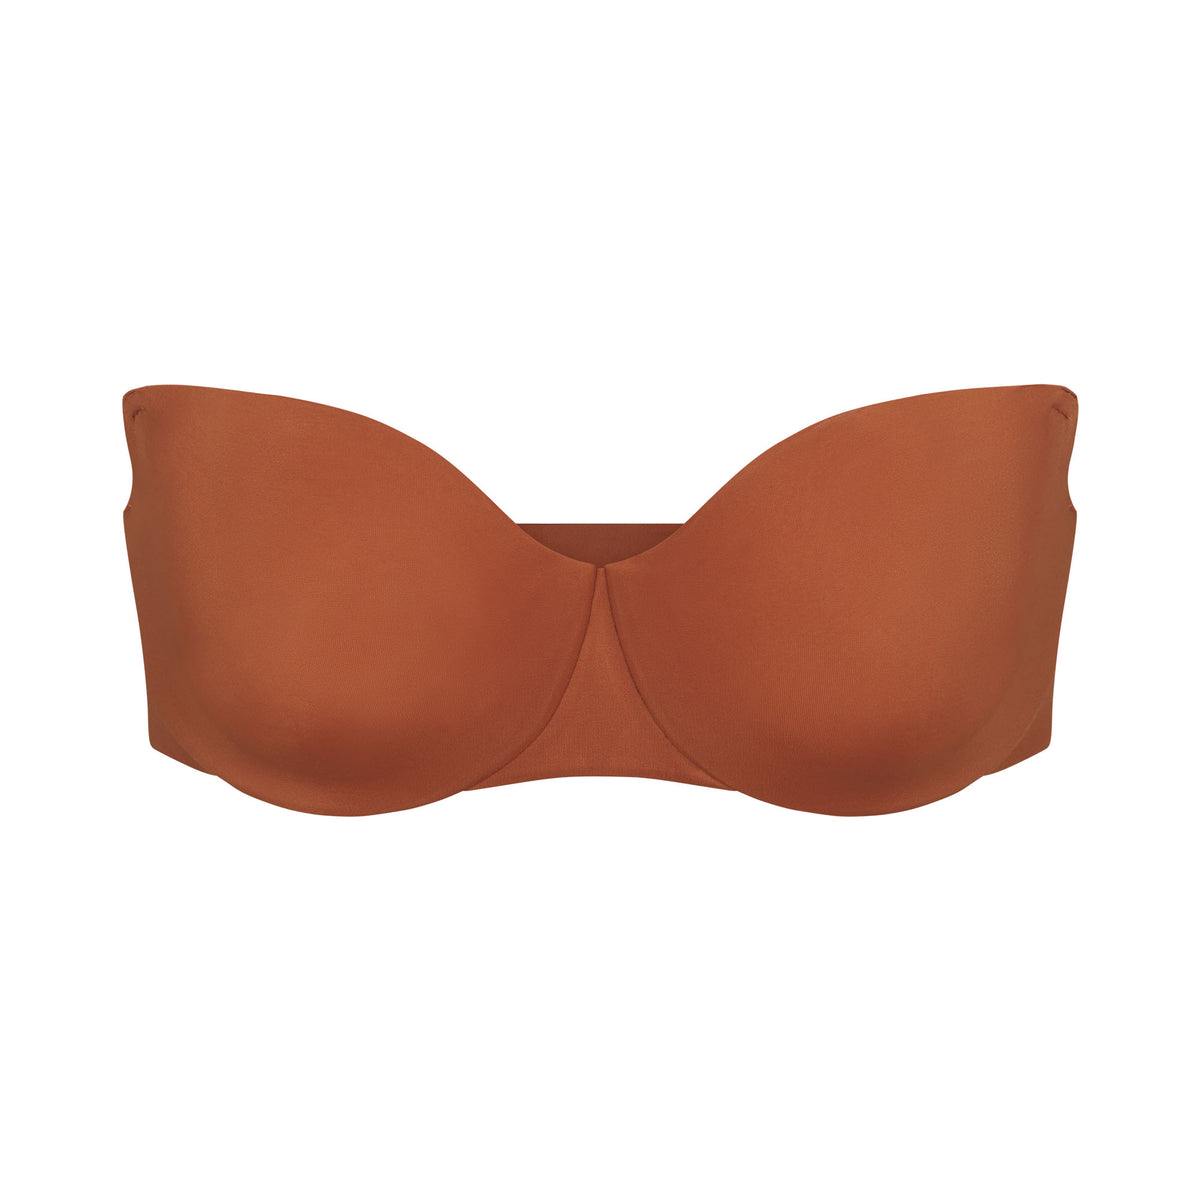  BRABIC Plunge Strapless Sticky Push Up Bra Backless Adhesive  Invisible